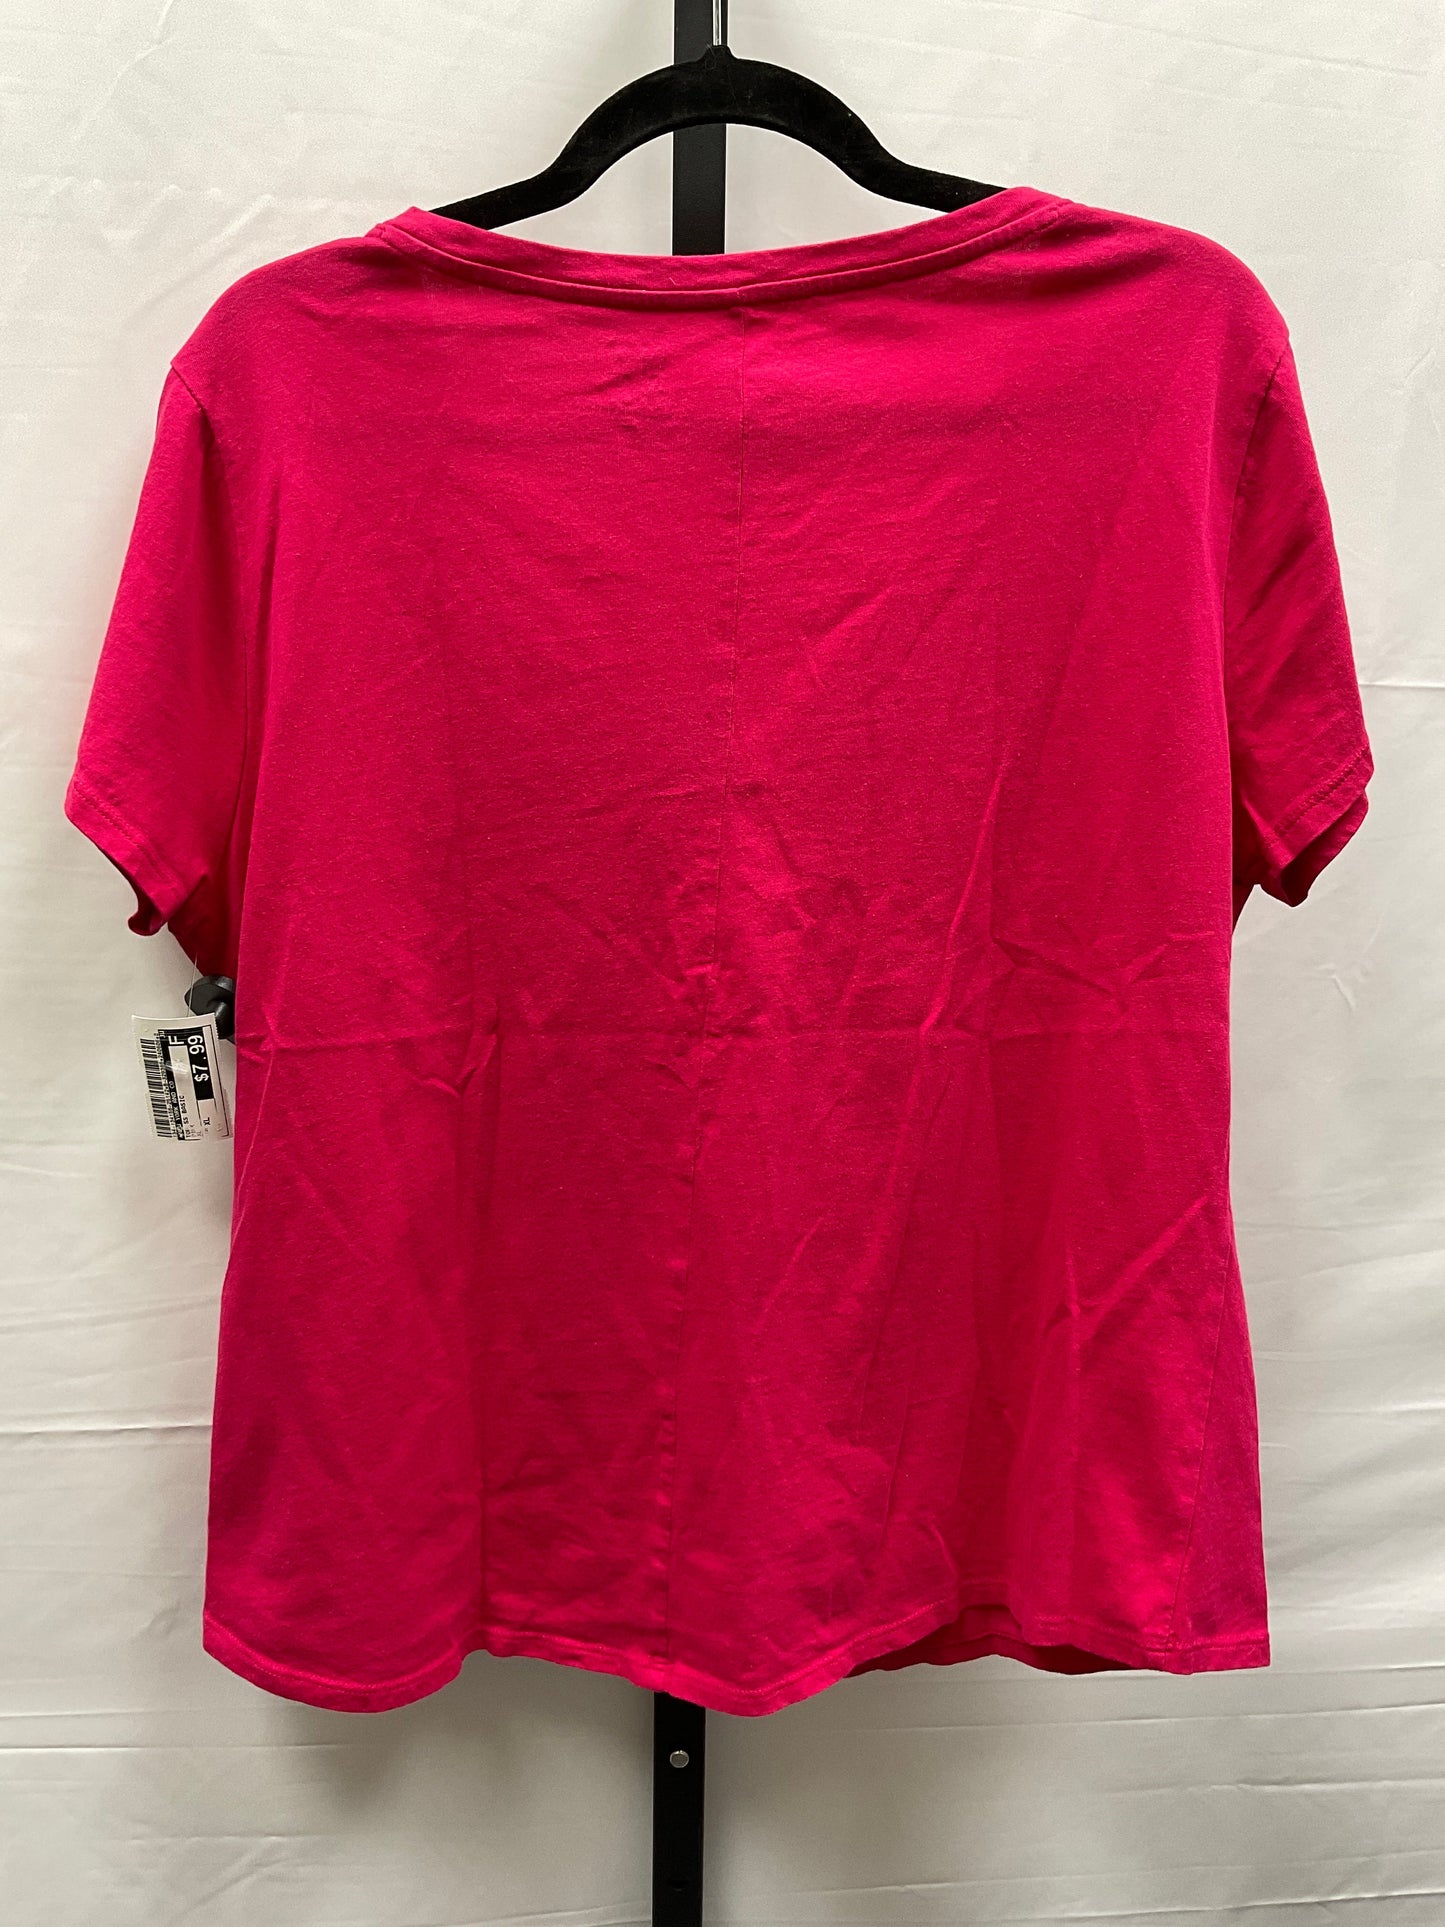 Pink Top Short Sleeve Basic New York And Co, Size Xl